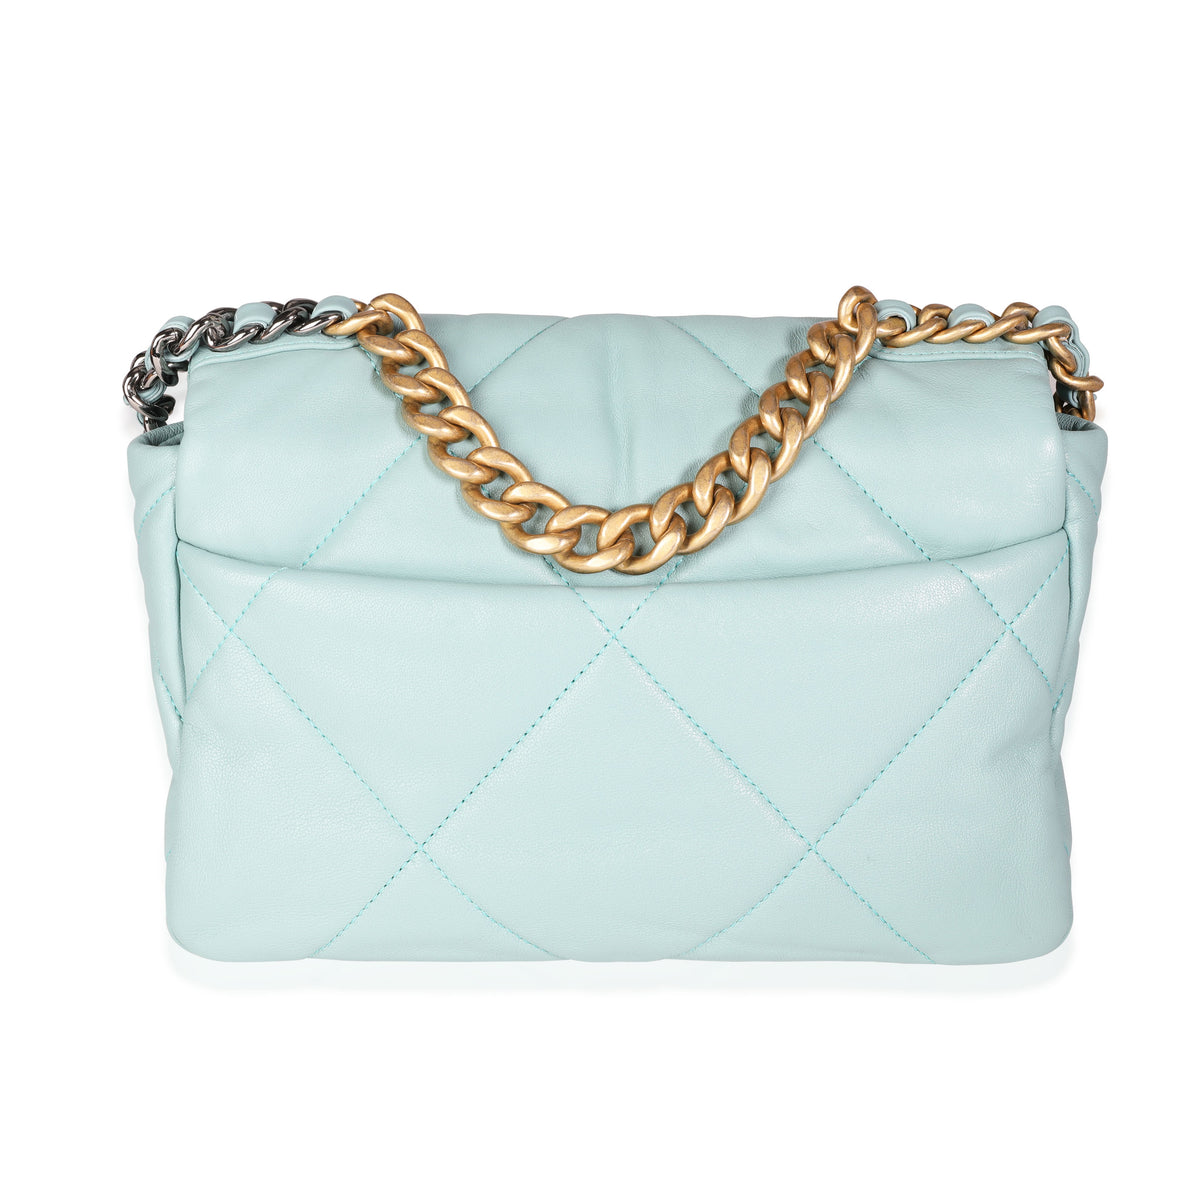 CHANEL Lambskin Quilted Medium Chanel 19 Flap Light Blue 497705